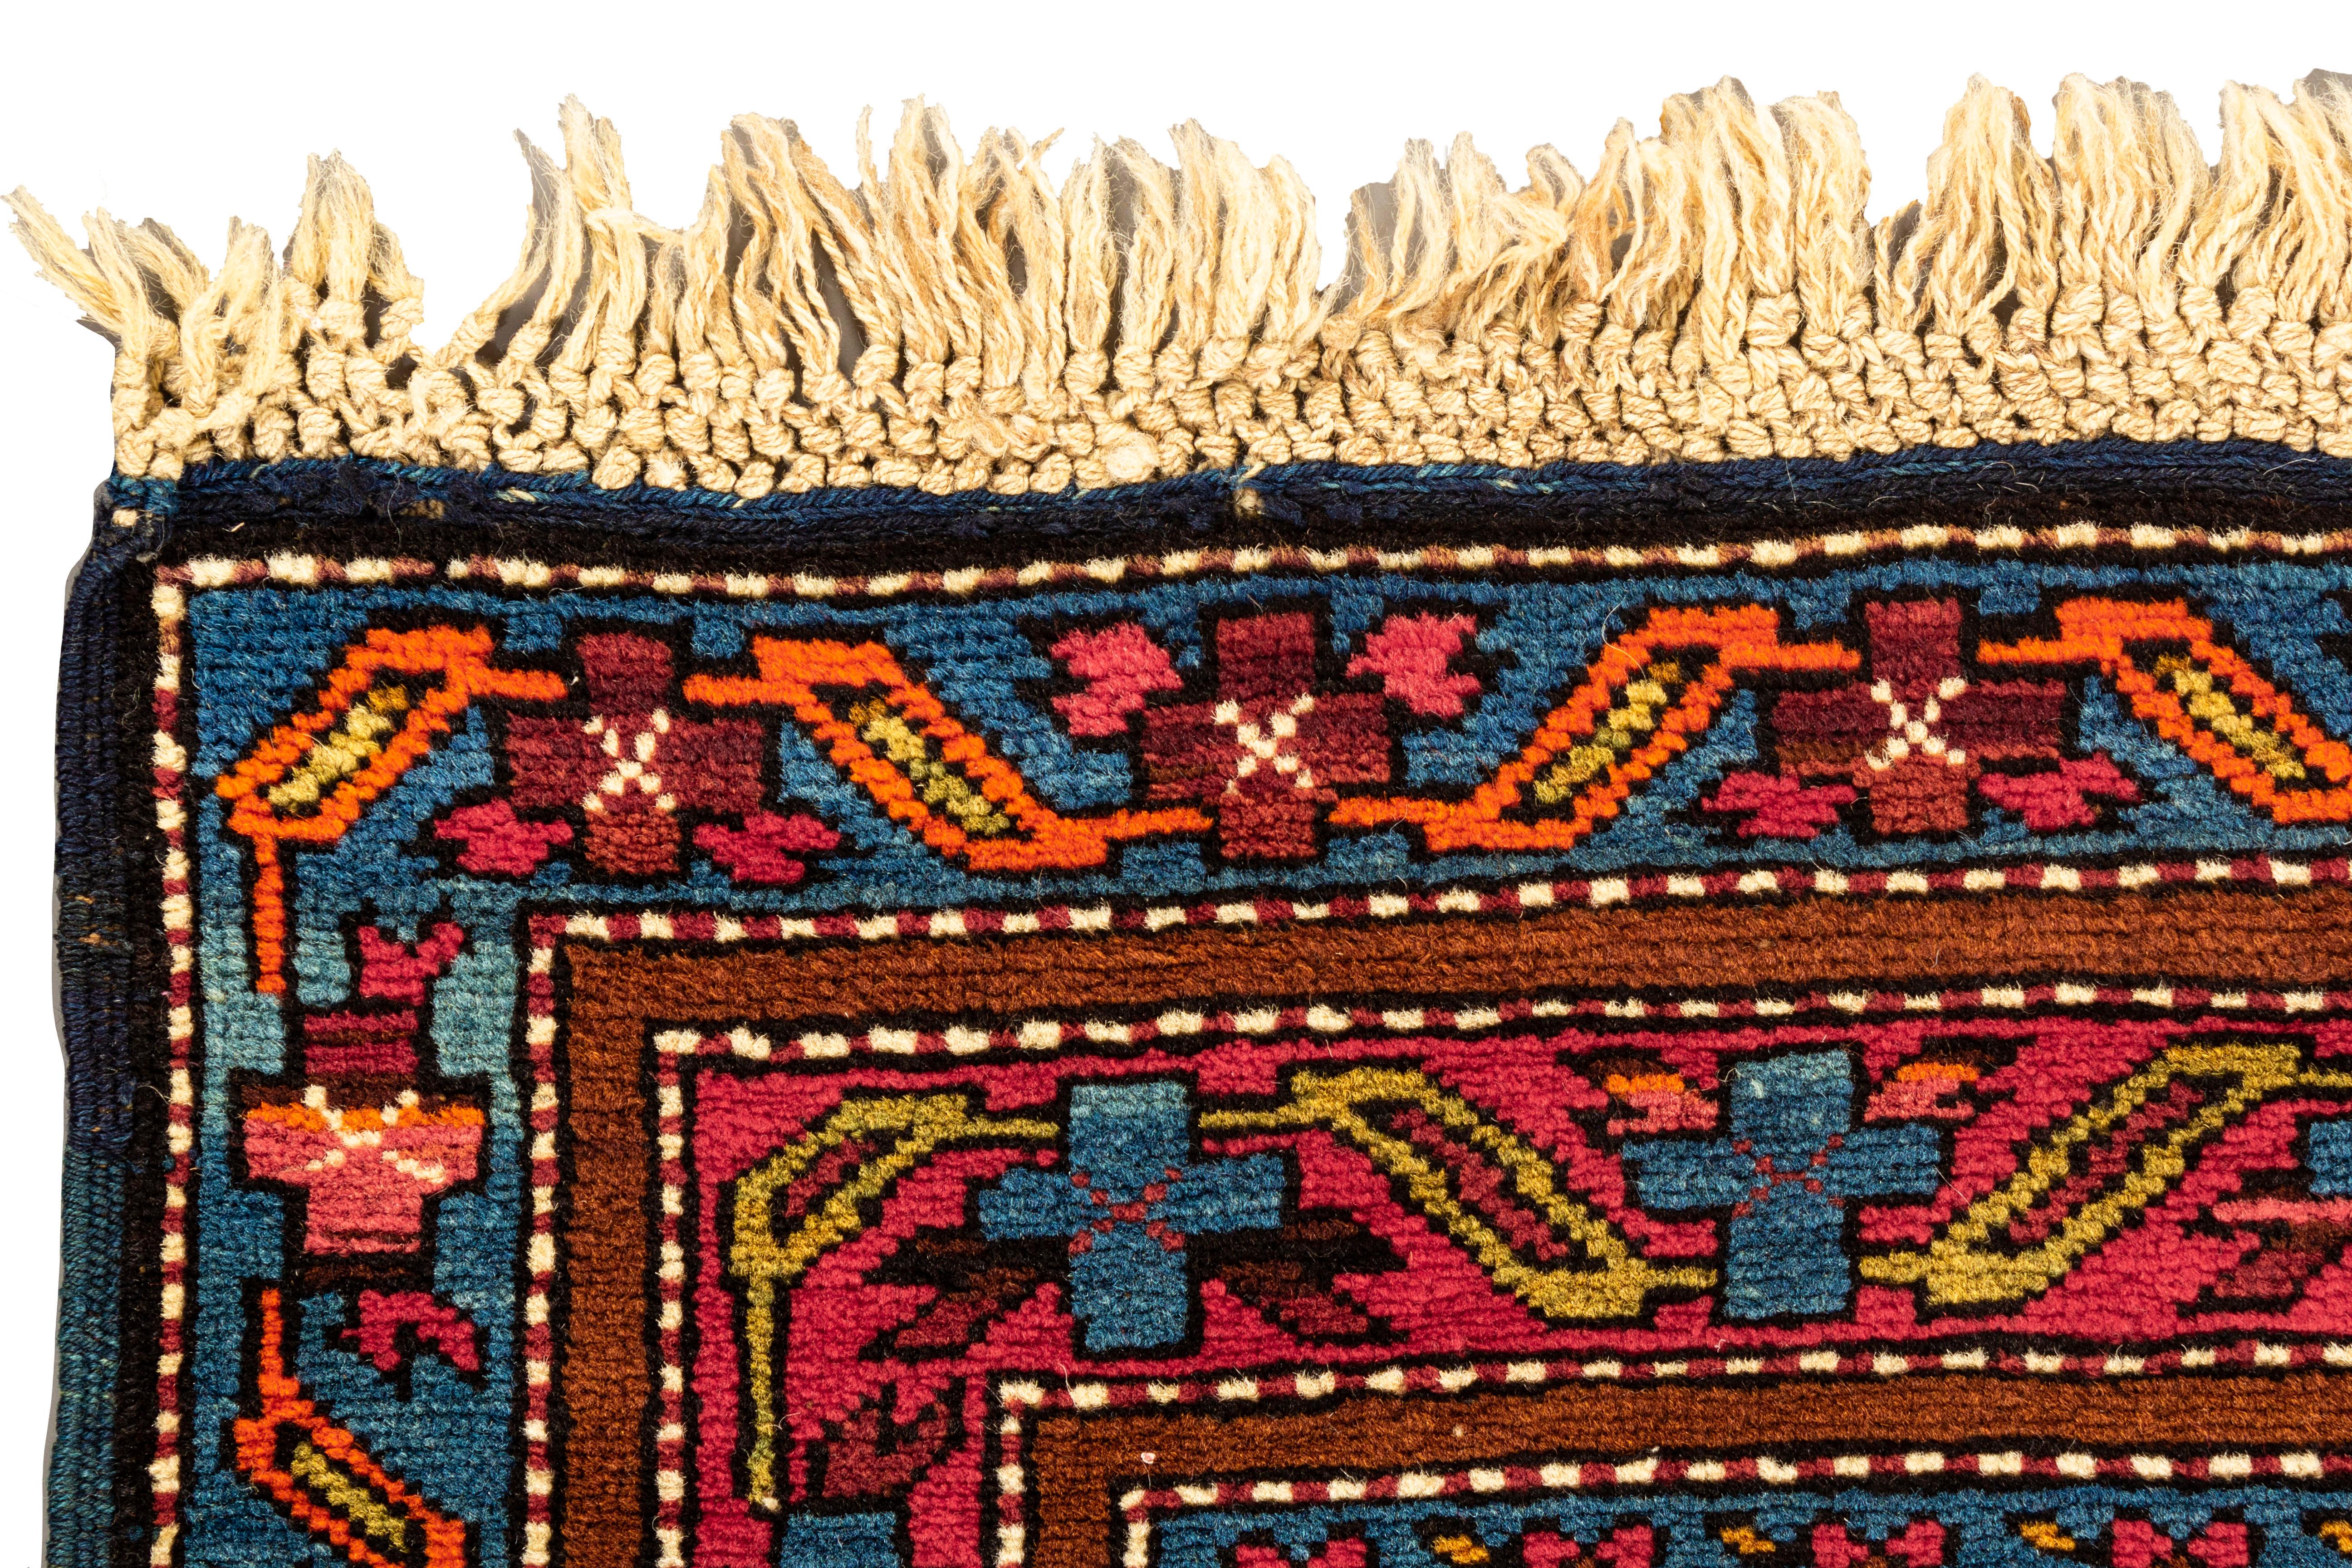 Antique Caucasian Shirvan Rug circa 1880. From east Caucasia a Shirvan handwoven rug circa 1880, with bold and vibrant colors, that create a true sense of beauty, to this tribal rug. The central blue field is filled with wonderful primitive designs,